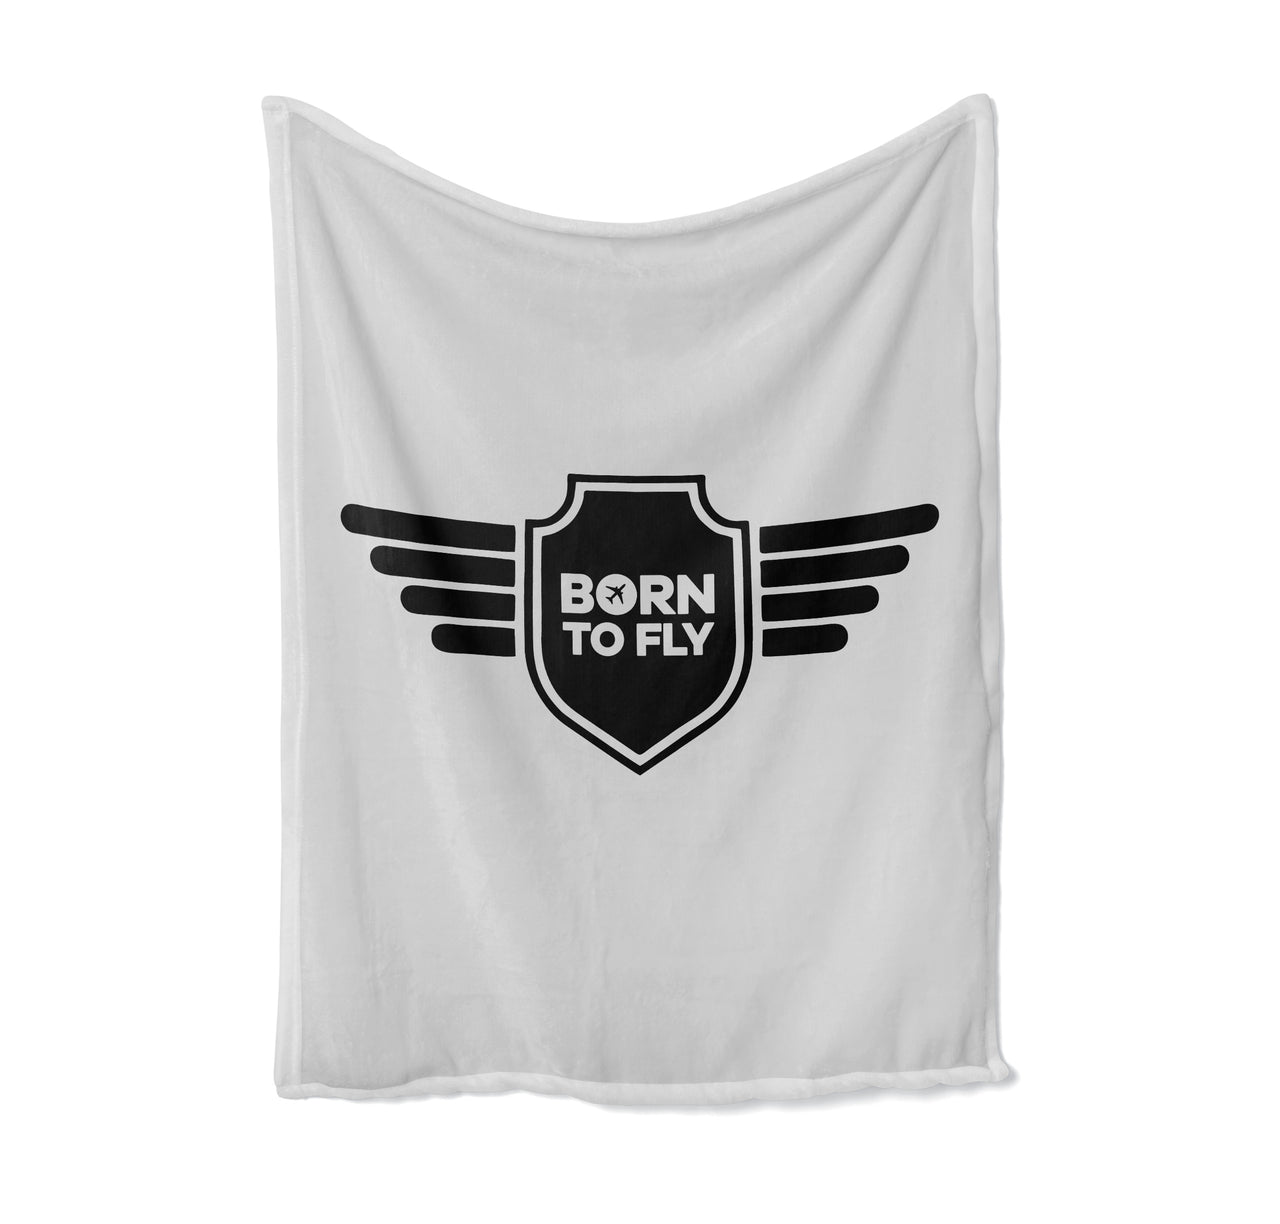 Born To Fly & Badge Designed Bed Blankets & Covers